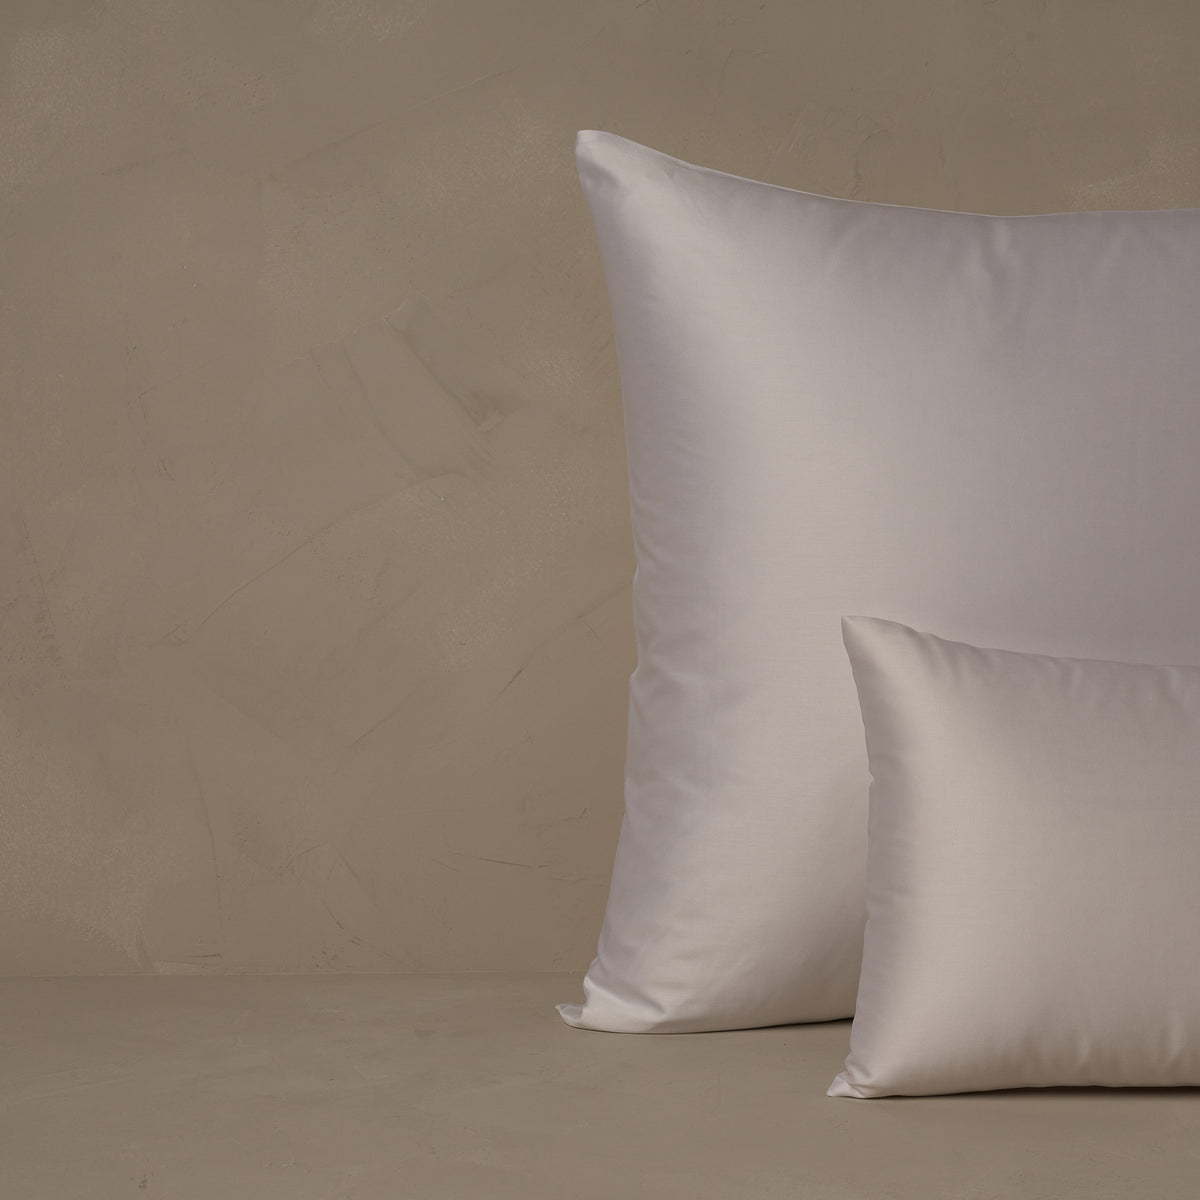 An image of a small boudoir or travel size pillow stacked in front of a large euro size pillow. The pillow cases are made in Italy of warm and buttery LETTO Giza Reserve Cotton Sateen in color white. data-image-id=